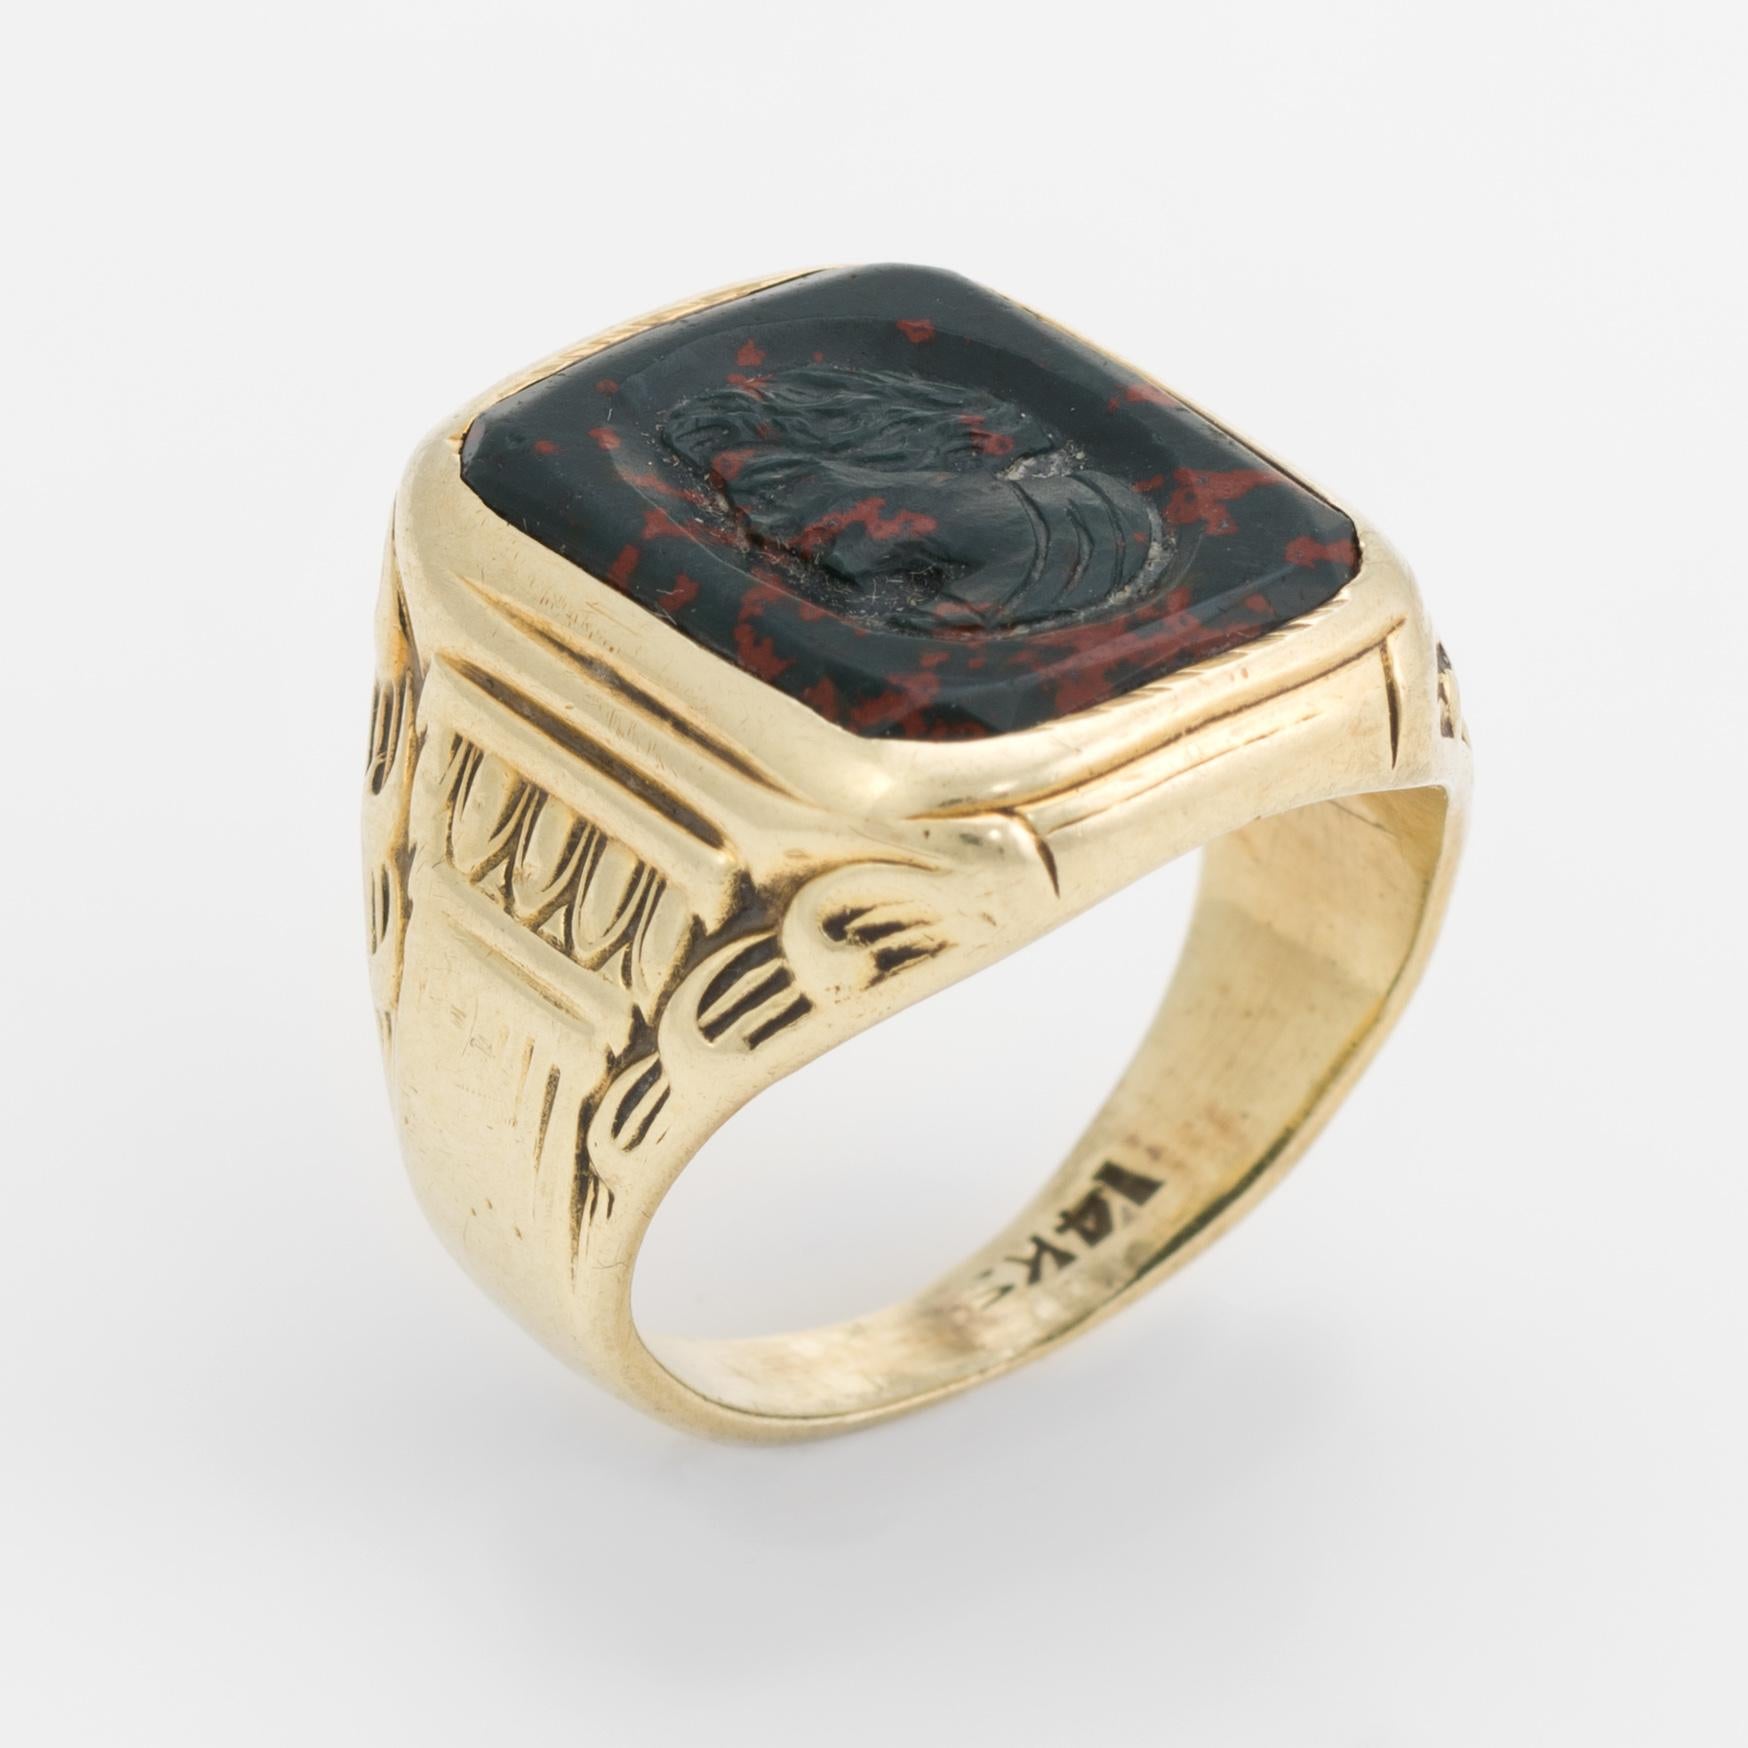 Finely detailed vintage Art Deco era ring (circa 1920s to 1930s), crafted in 14 karat yellow gold. 

Bloodstone measures 16mm x 12mm and features a carved bust of a man. The bloodstone is in very good condition with a few nicks visible under a 10x